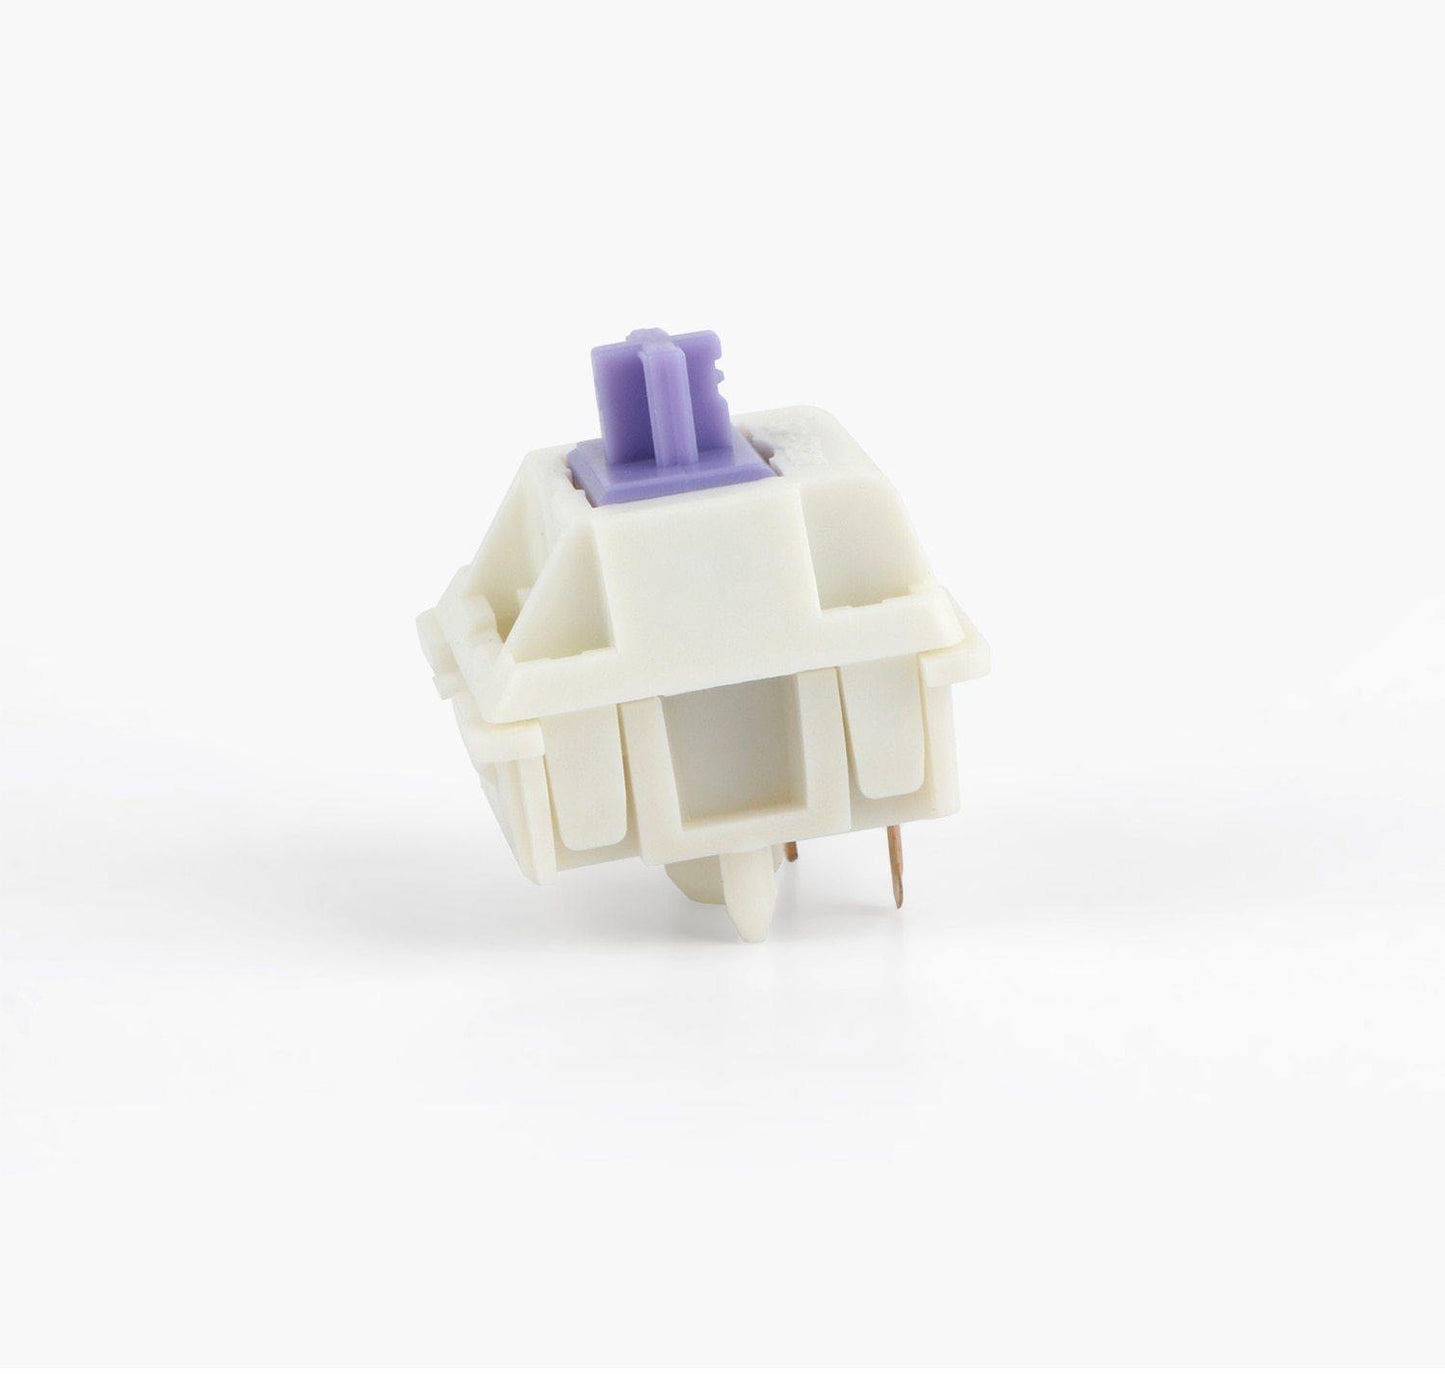 SP-STAR POLE STARS PURPLE TACTILE SWITCHES - THE KEYCAP CLUB